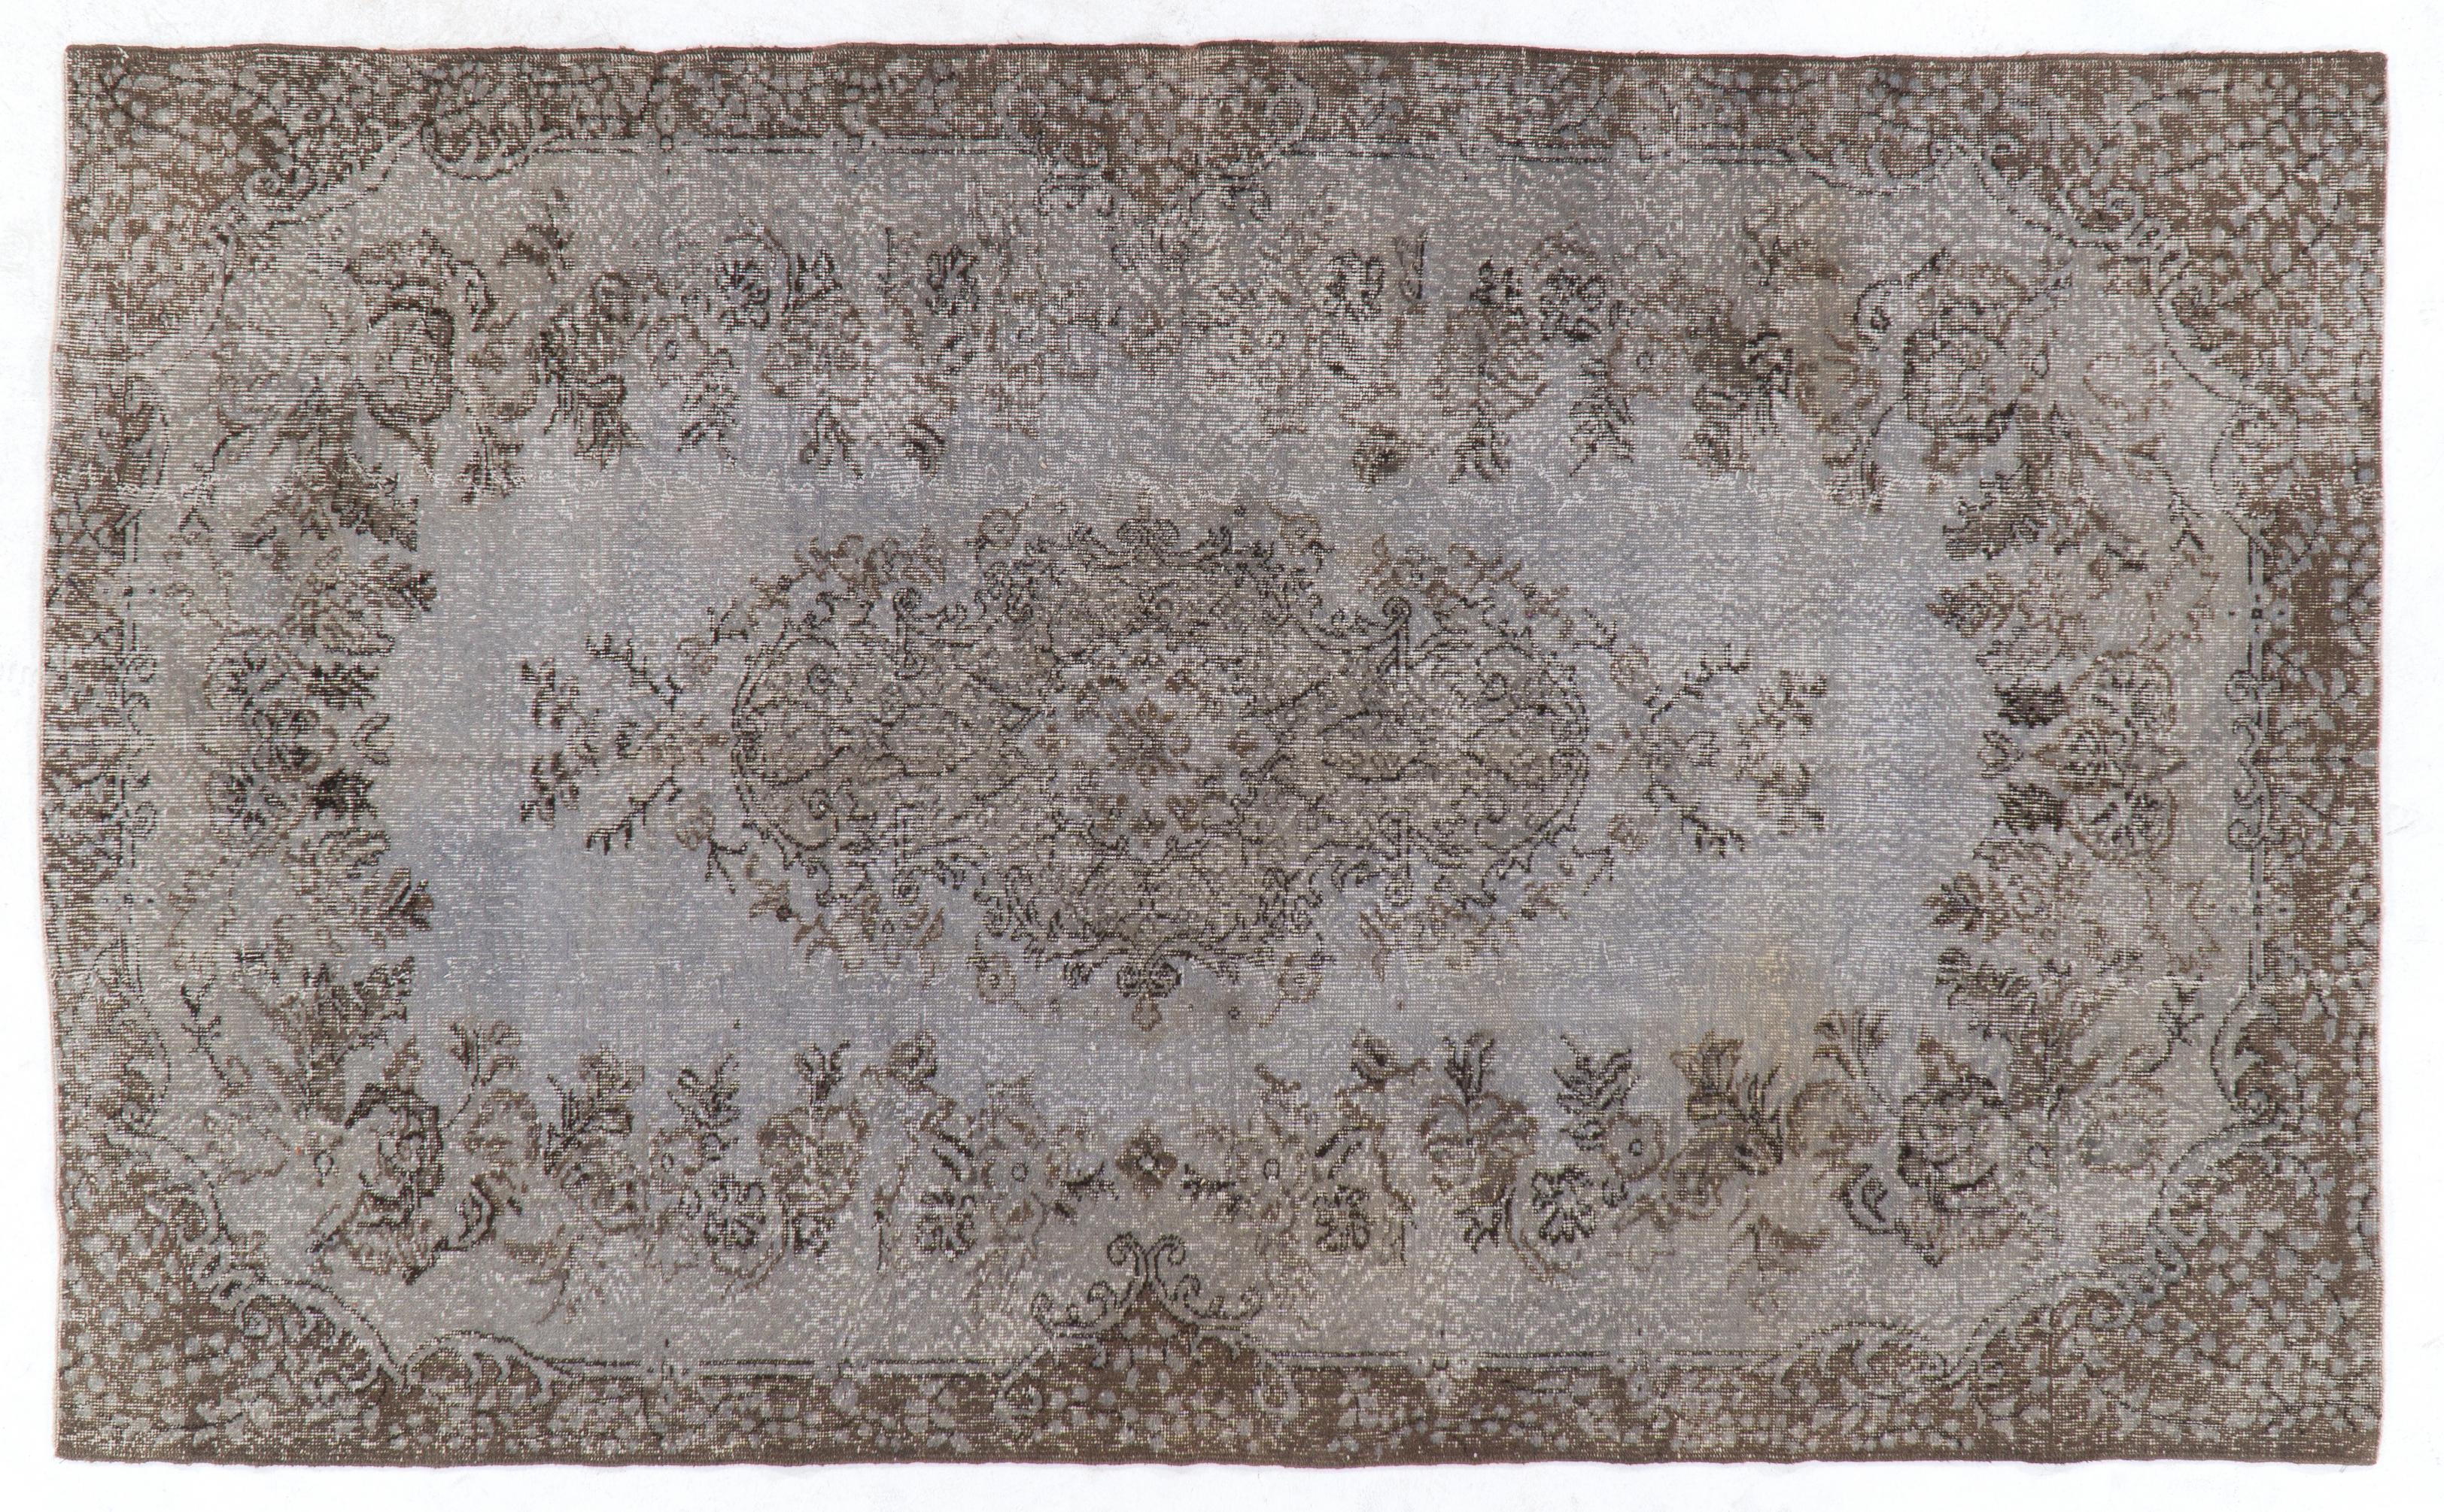 Modern 6x10 Ft Vintage Handmade Anatolian Area Rug Re-Dyed in Gray Color For Sale